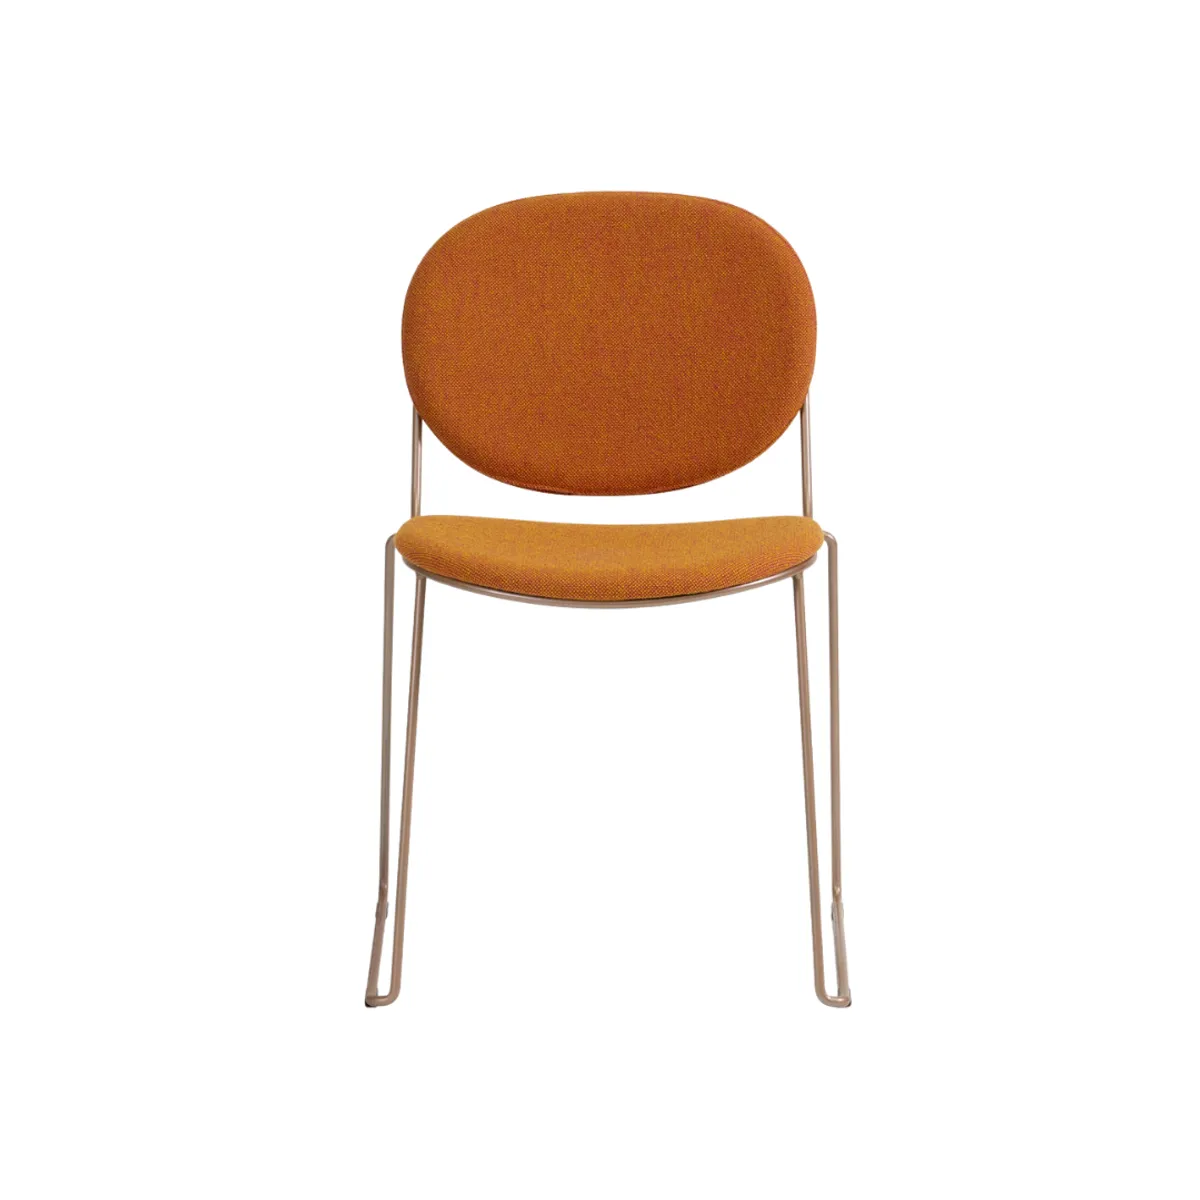 Timo stacking chair 5